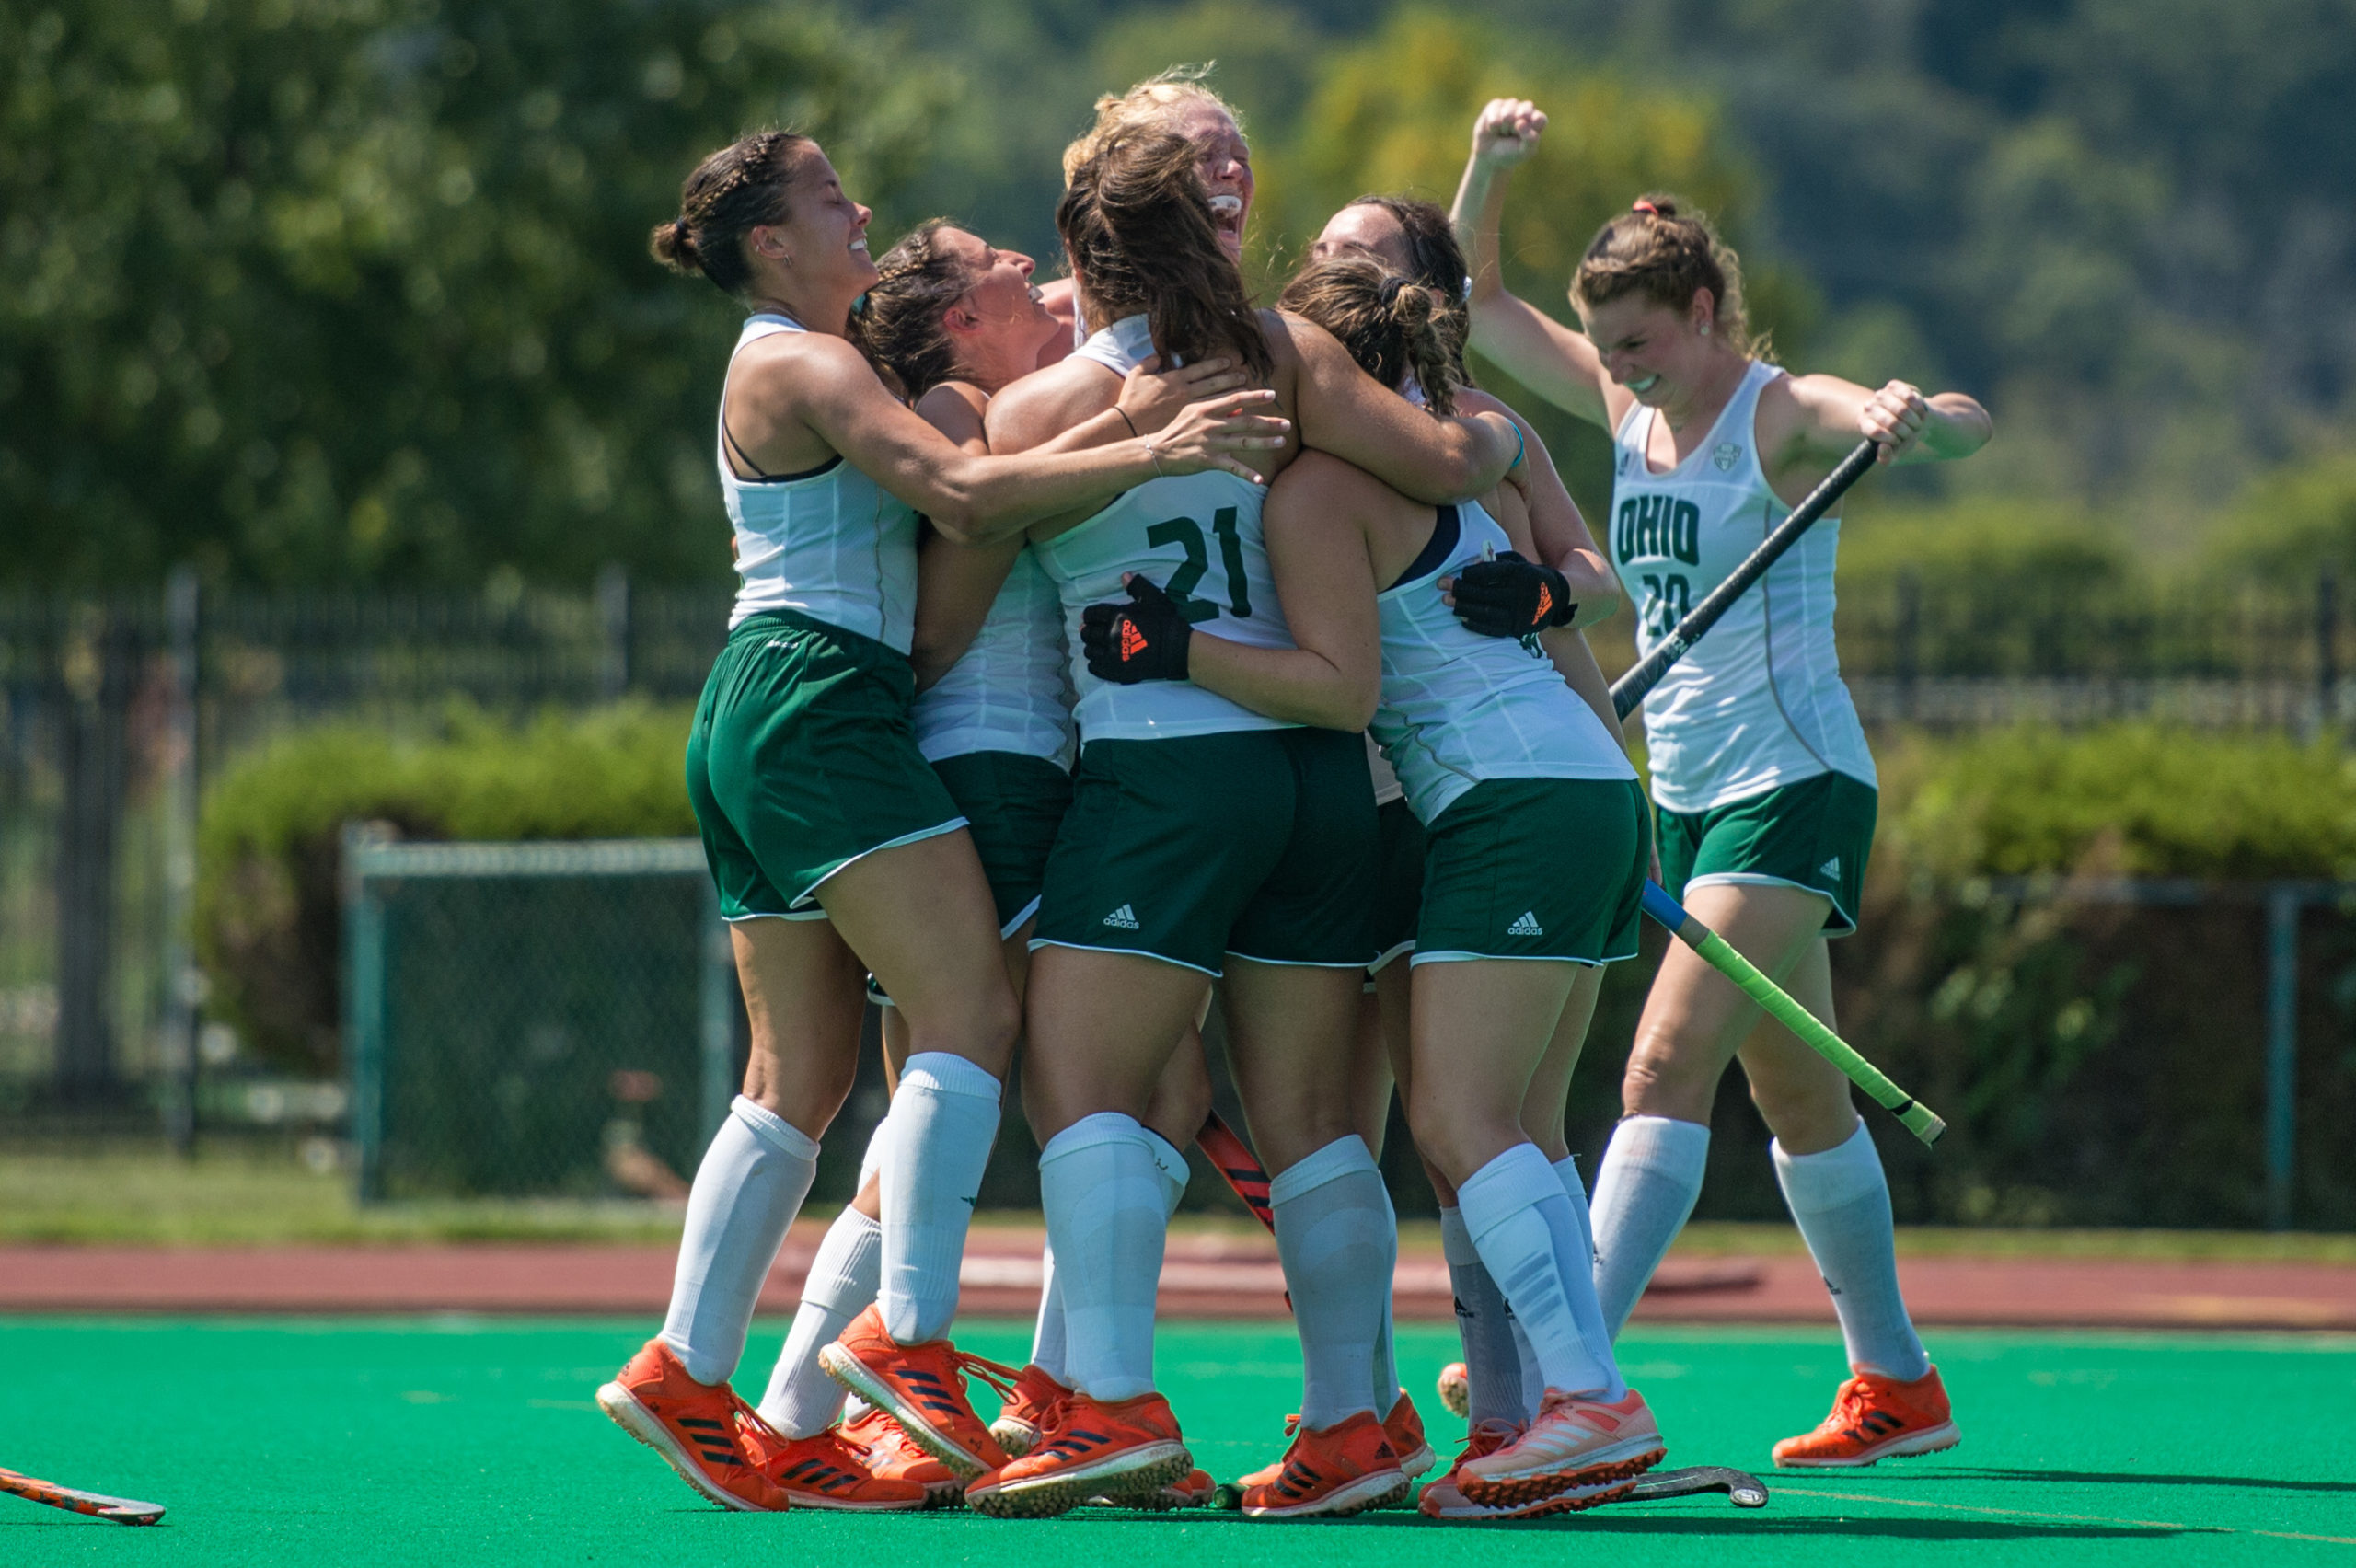 The Ohio University field hockey team celebrates in a group hug in white uniform tops and green kilts.